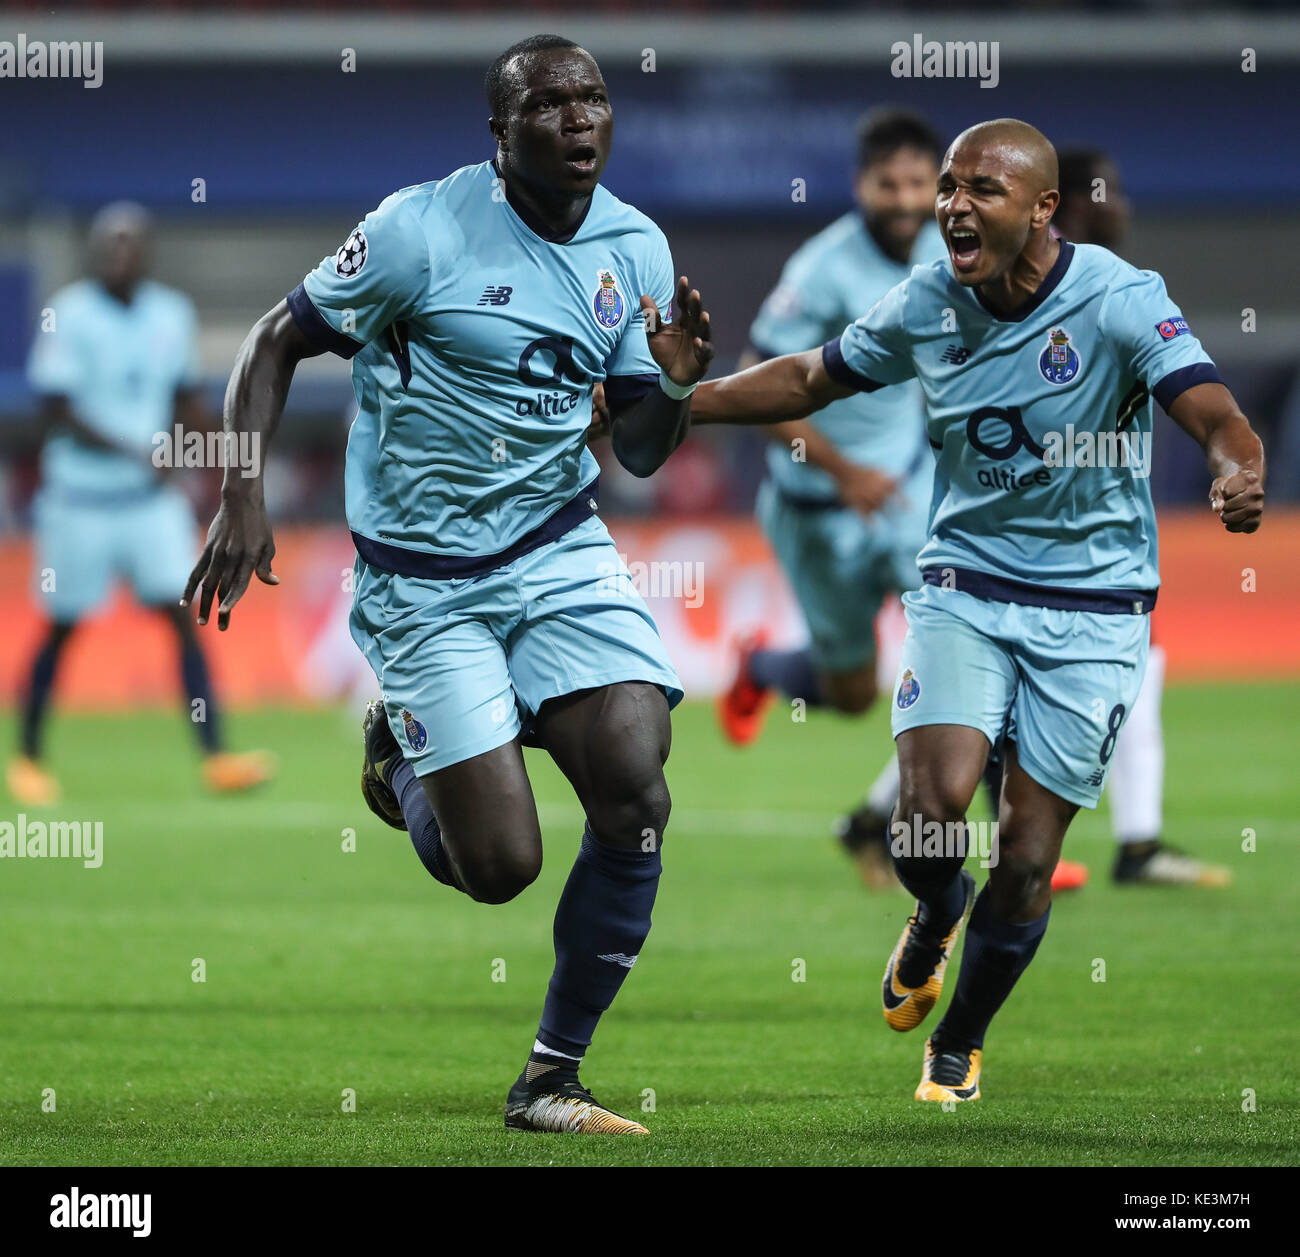 (171018) -- LEIPZIG, Oct. 18, 2017(Xinhua) -- Porto's Vincent Aboubakar (L) celebrates after socring during a match of Group G of 2017-18 Champions League against Leipzig in Leipzig, Germany, on Oct. 17, 2017. Leipzig won 3-2. (Xinhua/Shan Yuqi) Stock Photo